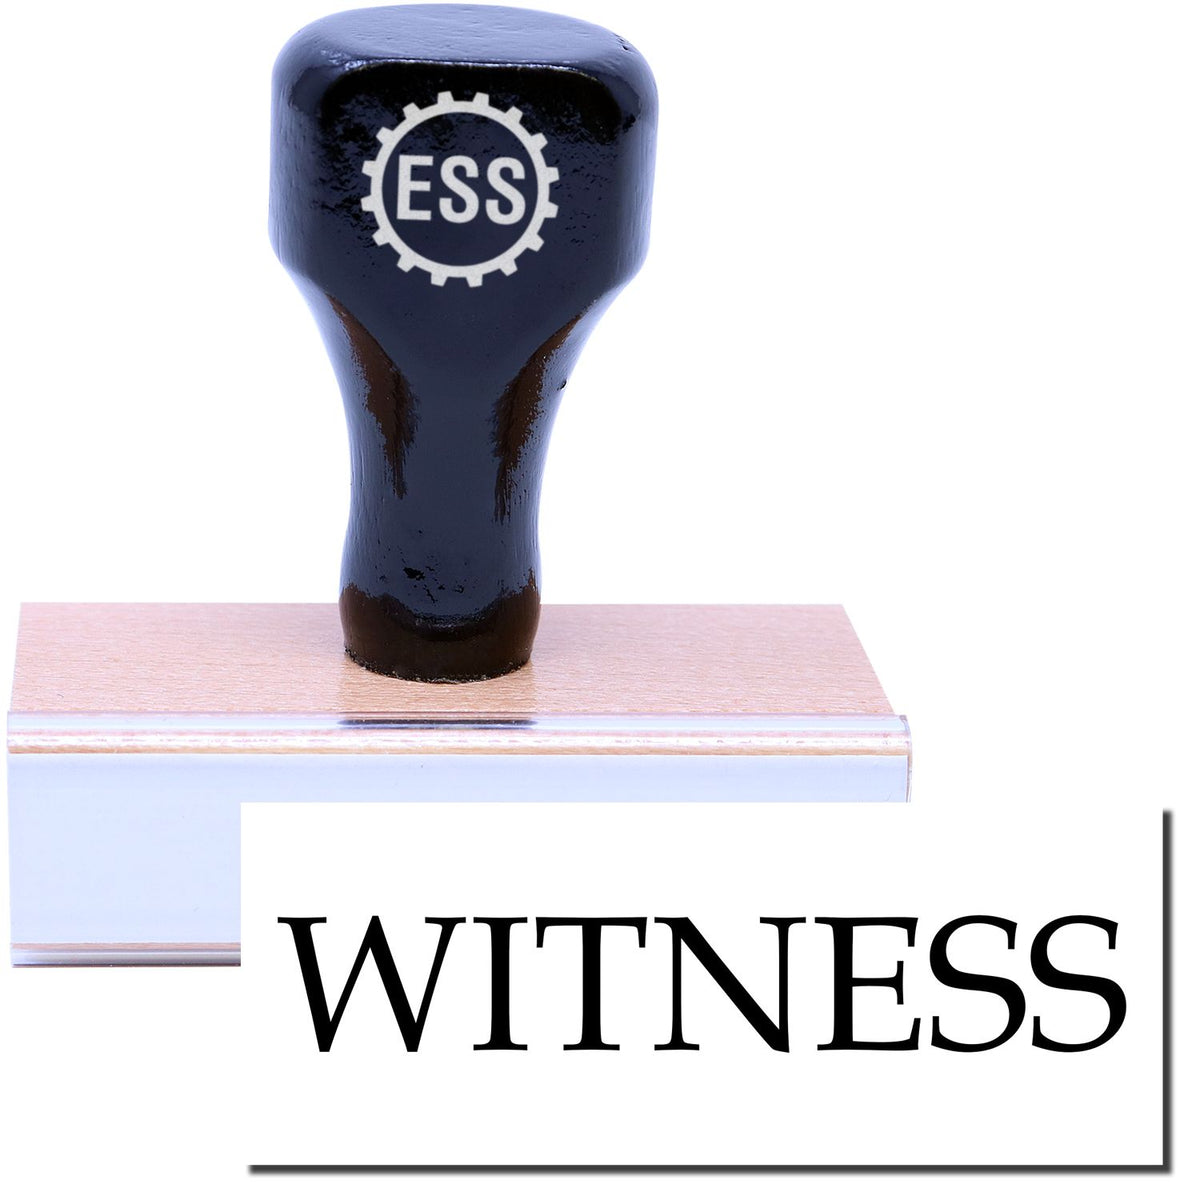 A stock office rubber stamp with a stamped image showing how the text &quot;WITNESS&quot; in a large font is displayed after stamping.